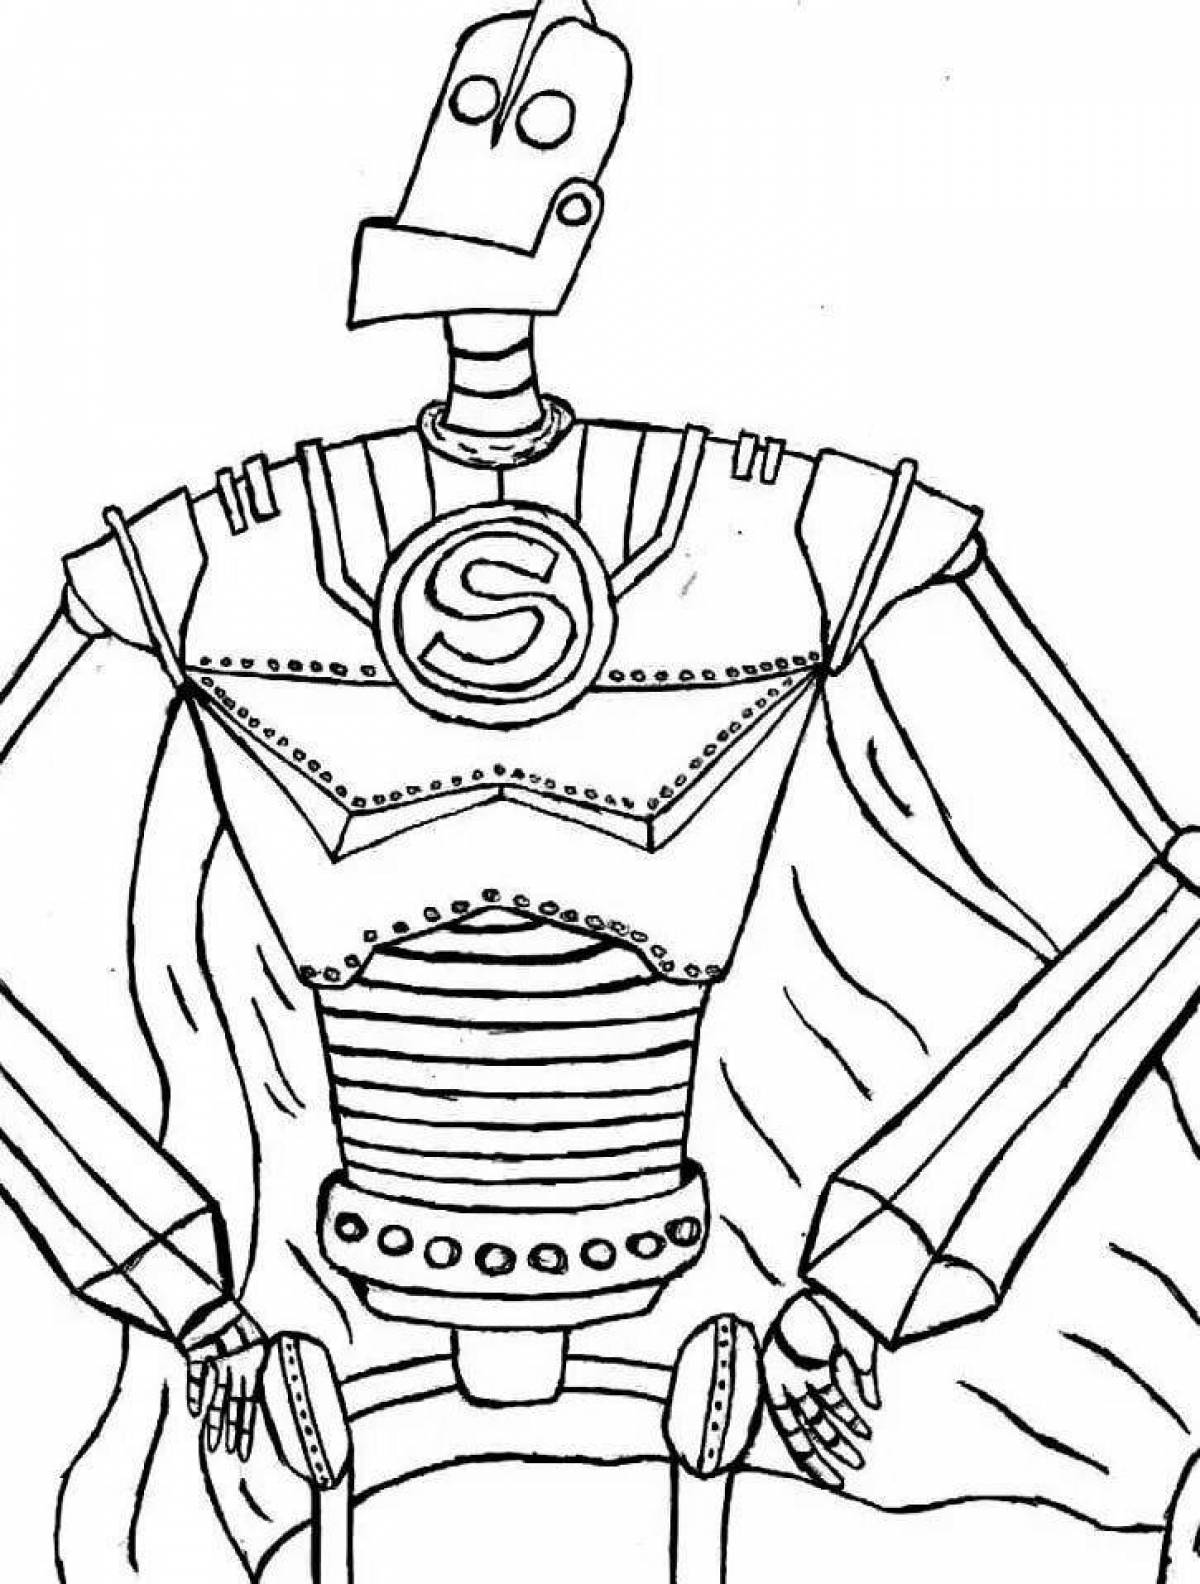 Impressive steel giant coloring page